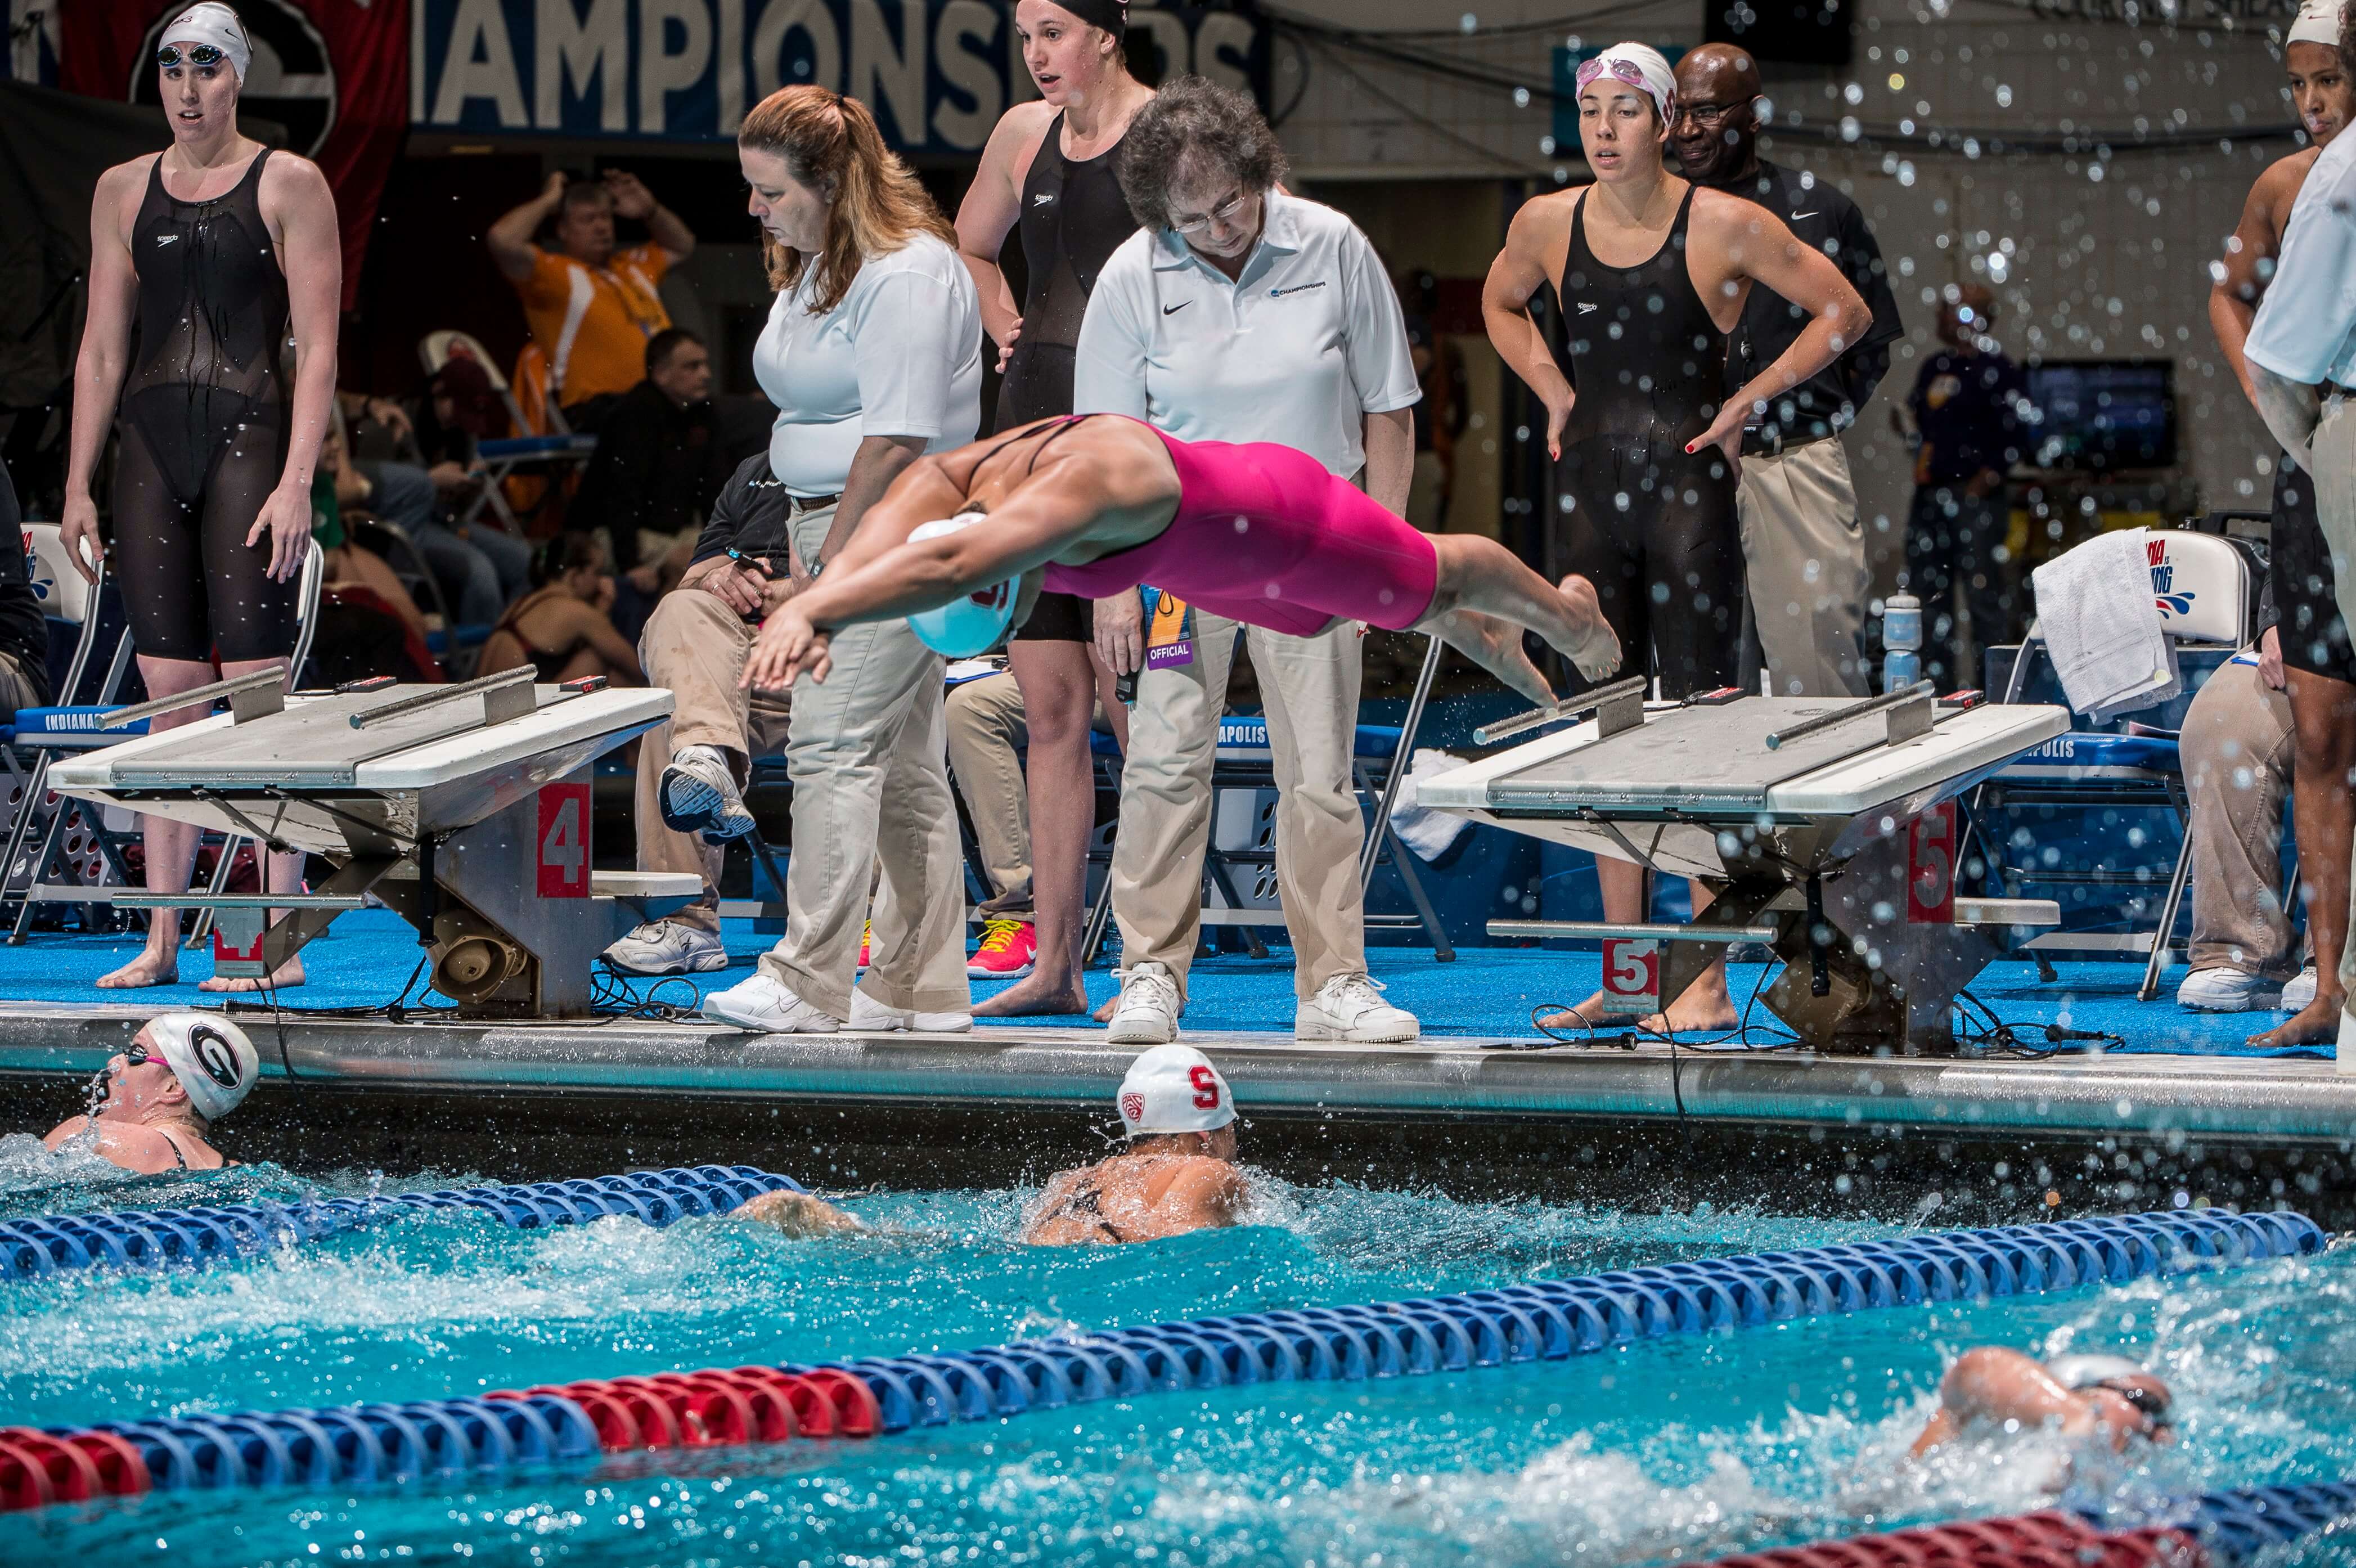 Stanford Usc Women Clash In Battle Of Undefeated Teams Swimming World News